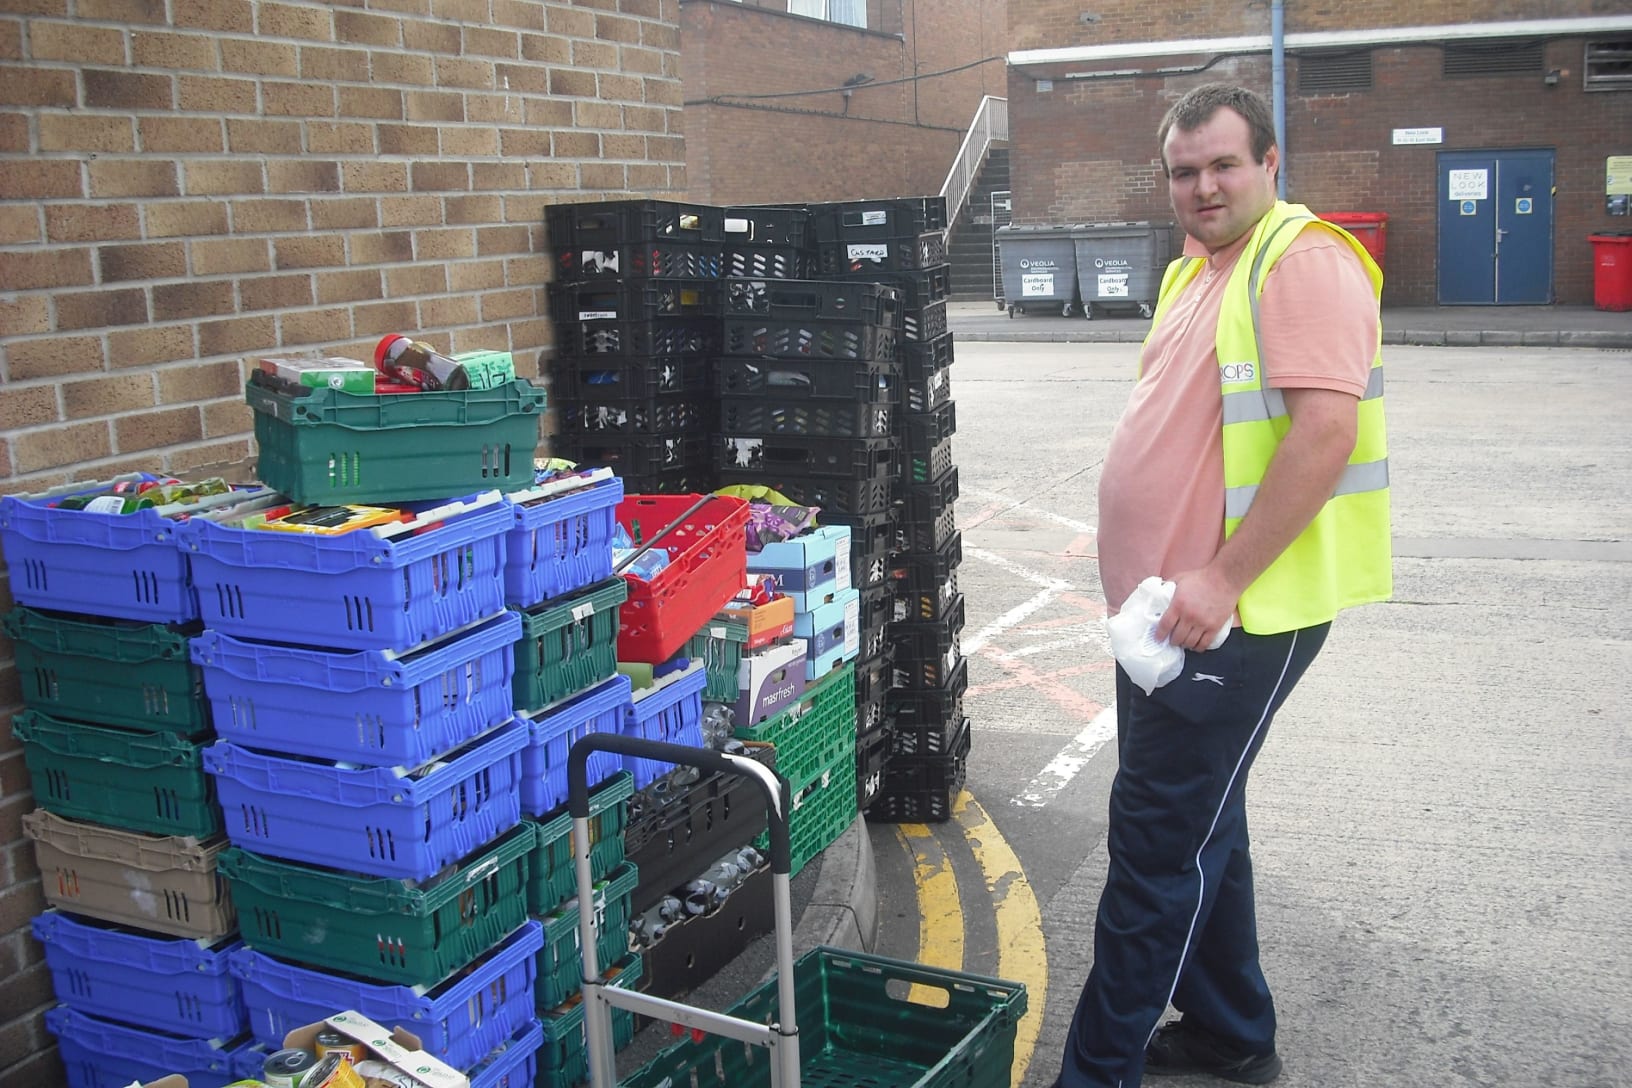 Trainee working at a foodbank, loading up boxes of donated goods